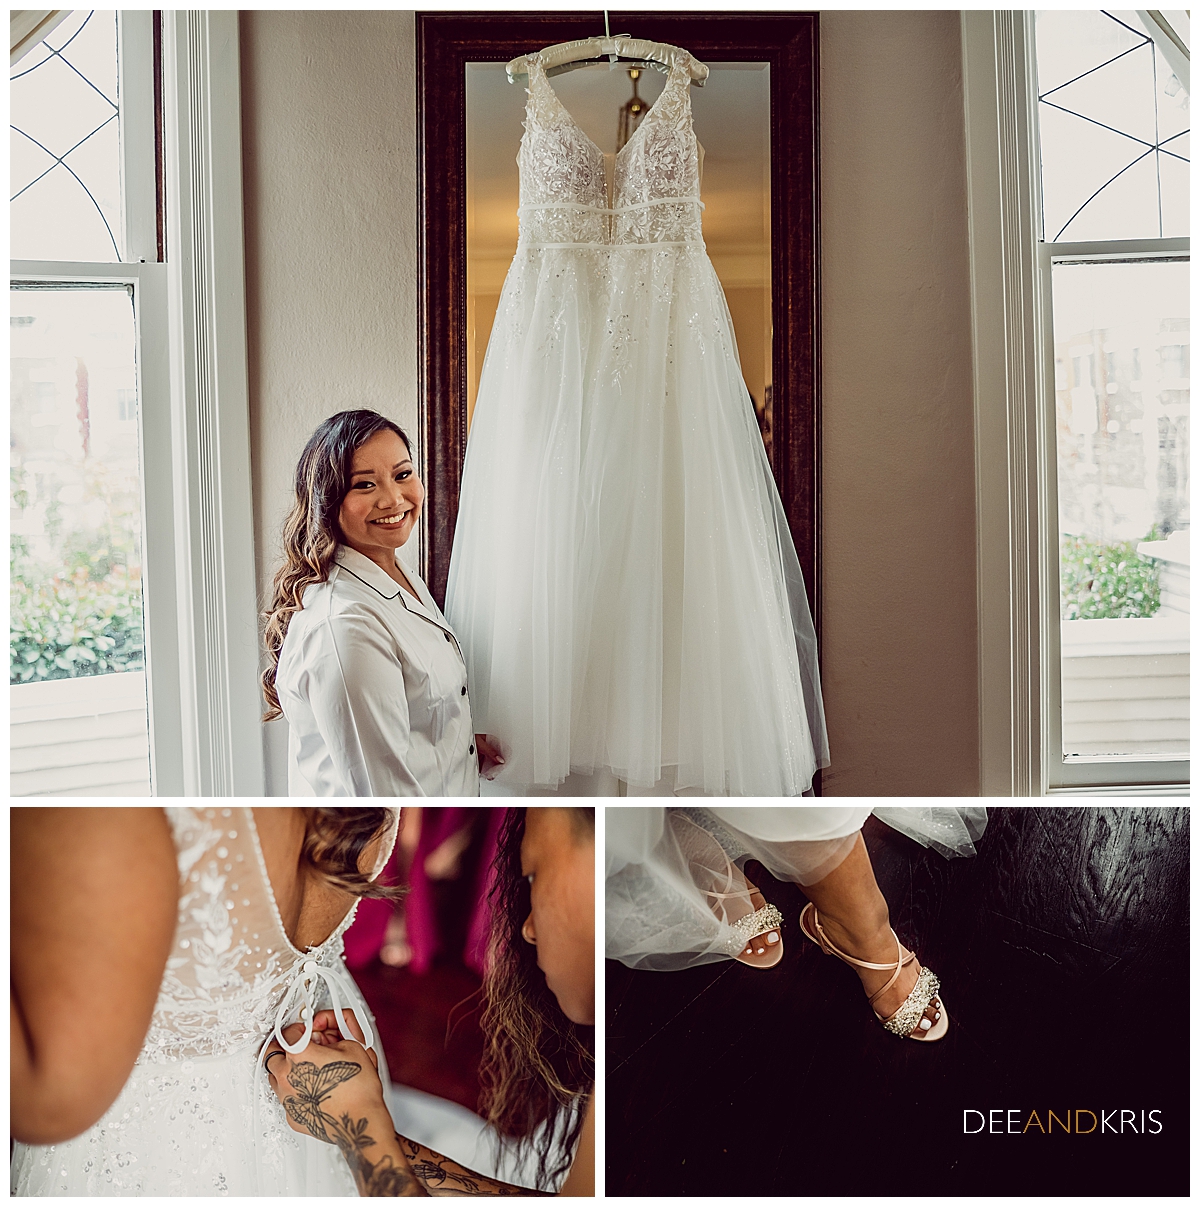 Three images: Top image of bride looking at camera standing next to wedding dress. Bottom left image of bridesmaid buttoning wedding dress bodice. Bottom right image of bride showing off shoes.